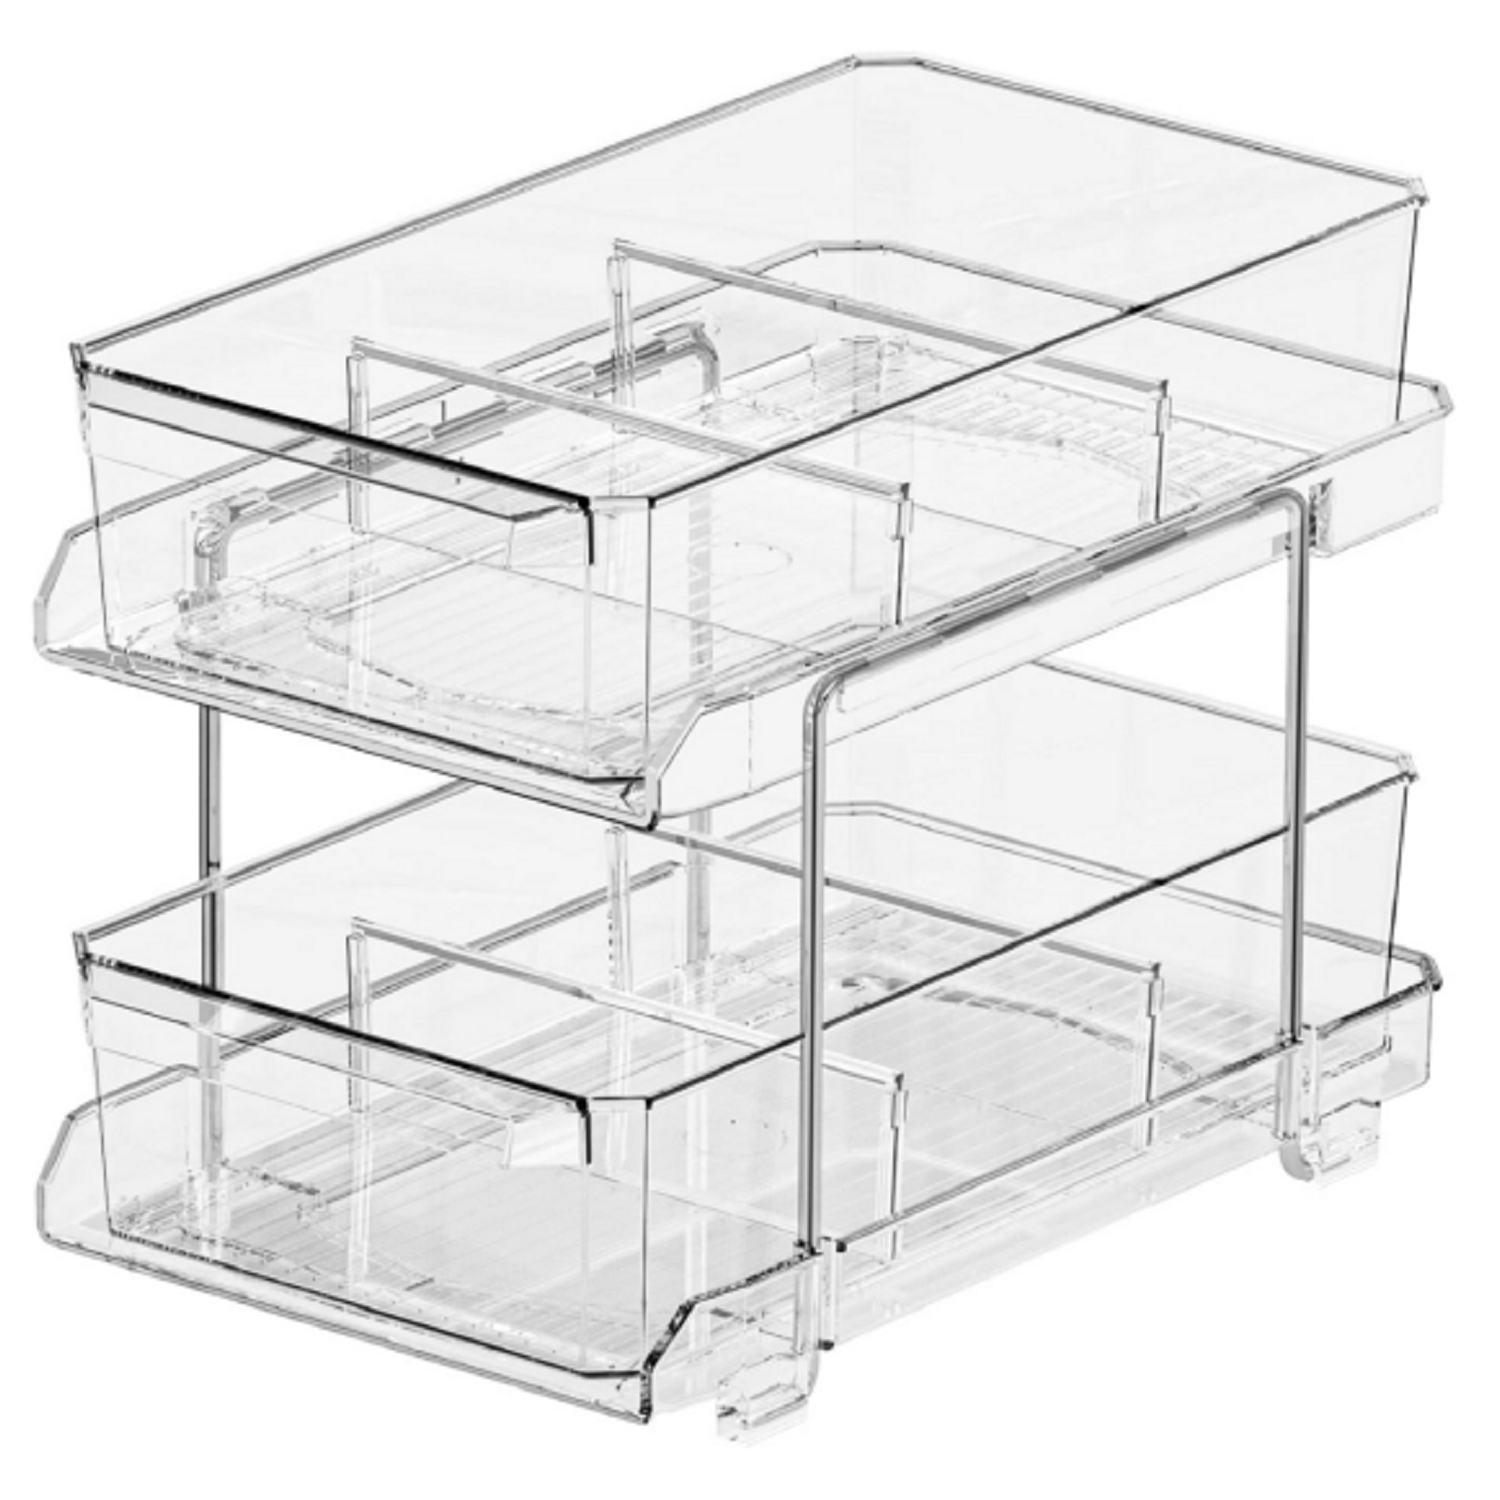 2 Tier Clear Organizer with Dividers for Cabinet / Counter